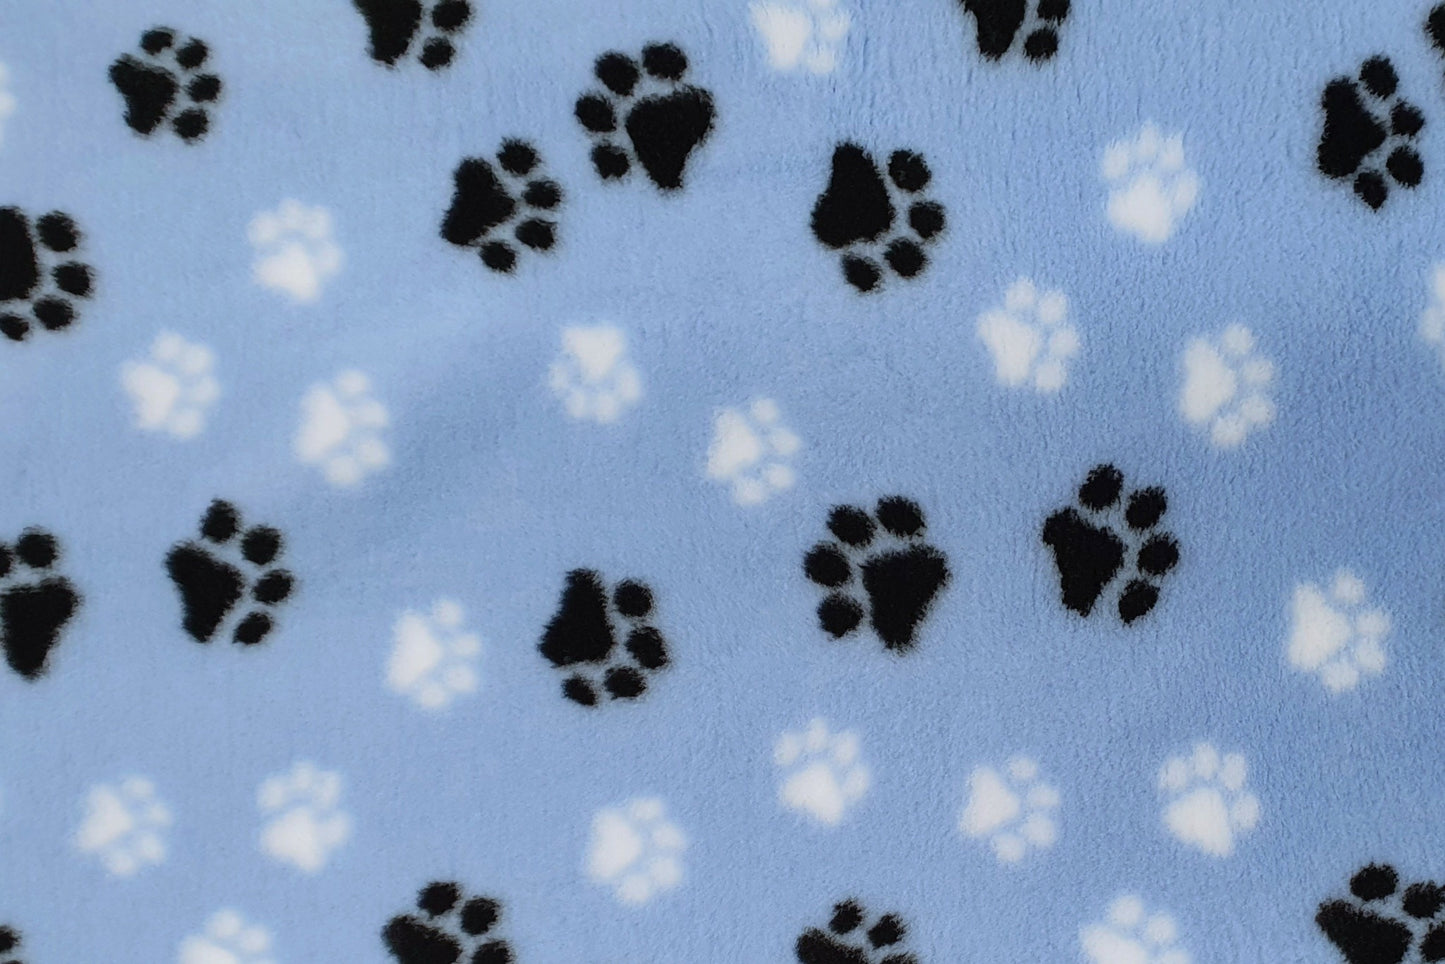 Vet Bed - No Backing - Light Blue with Black and White Paws